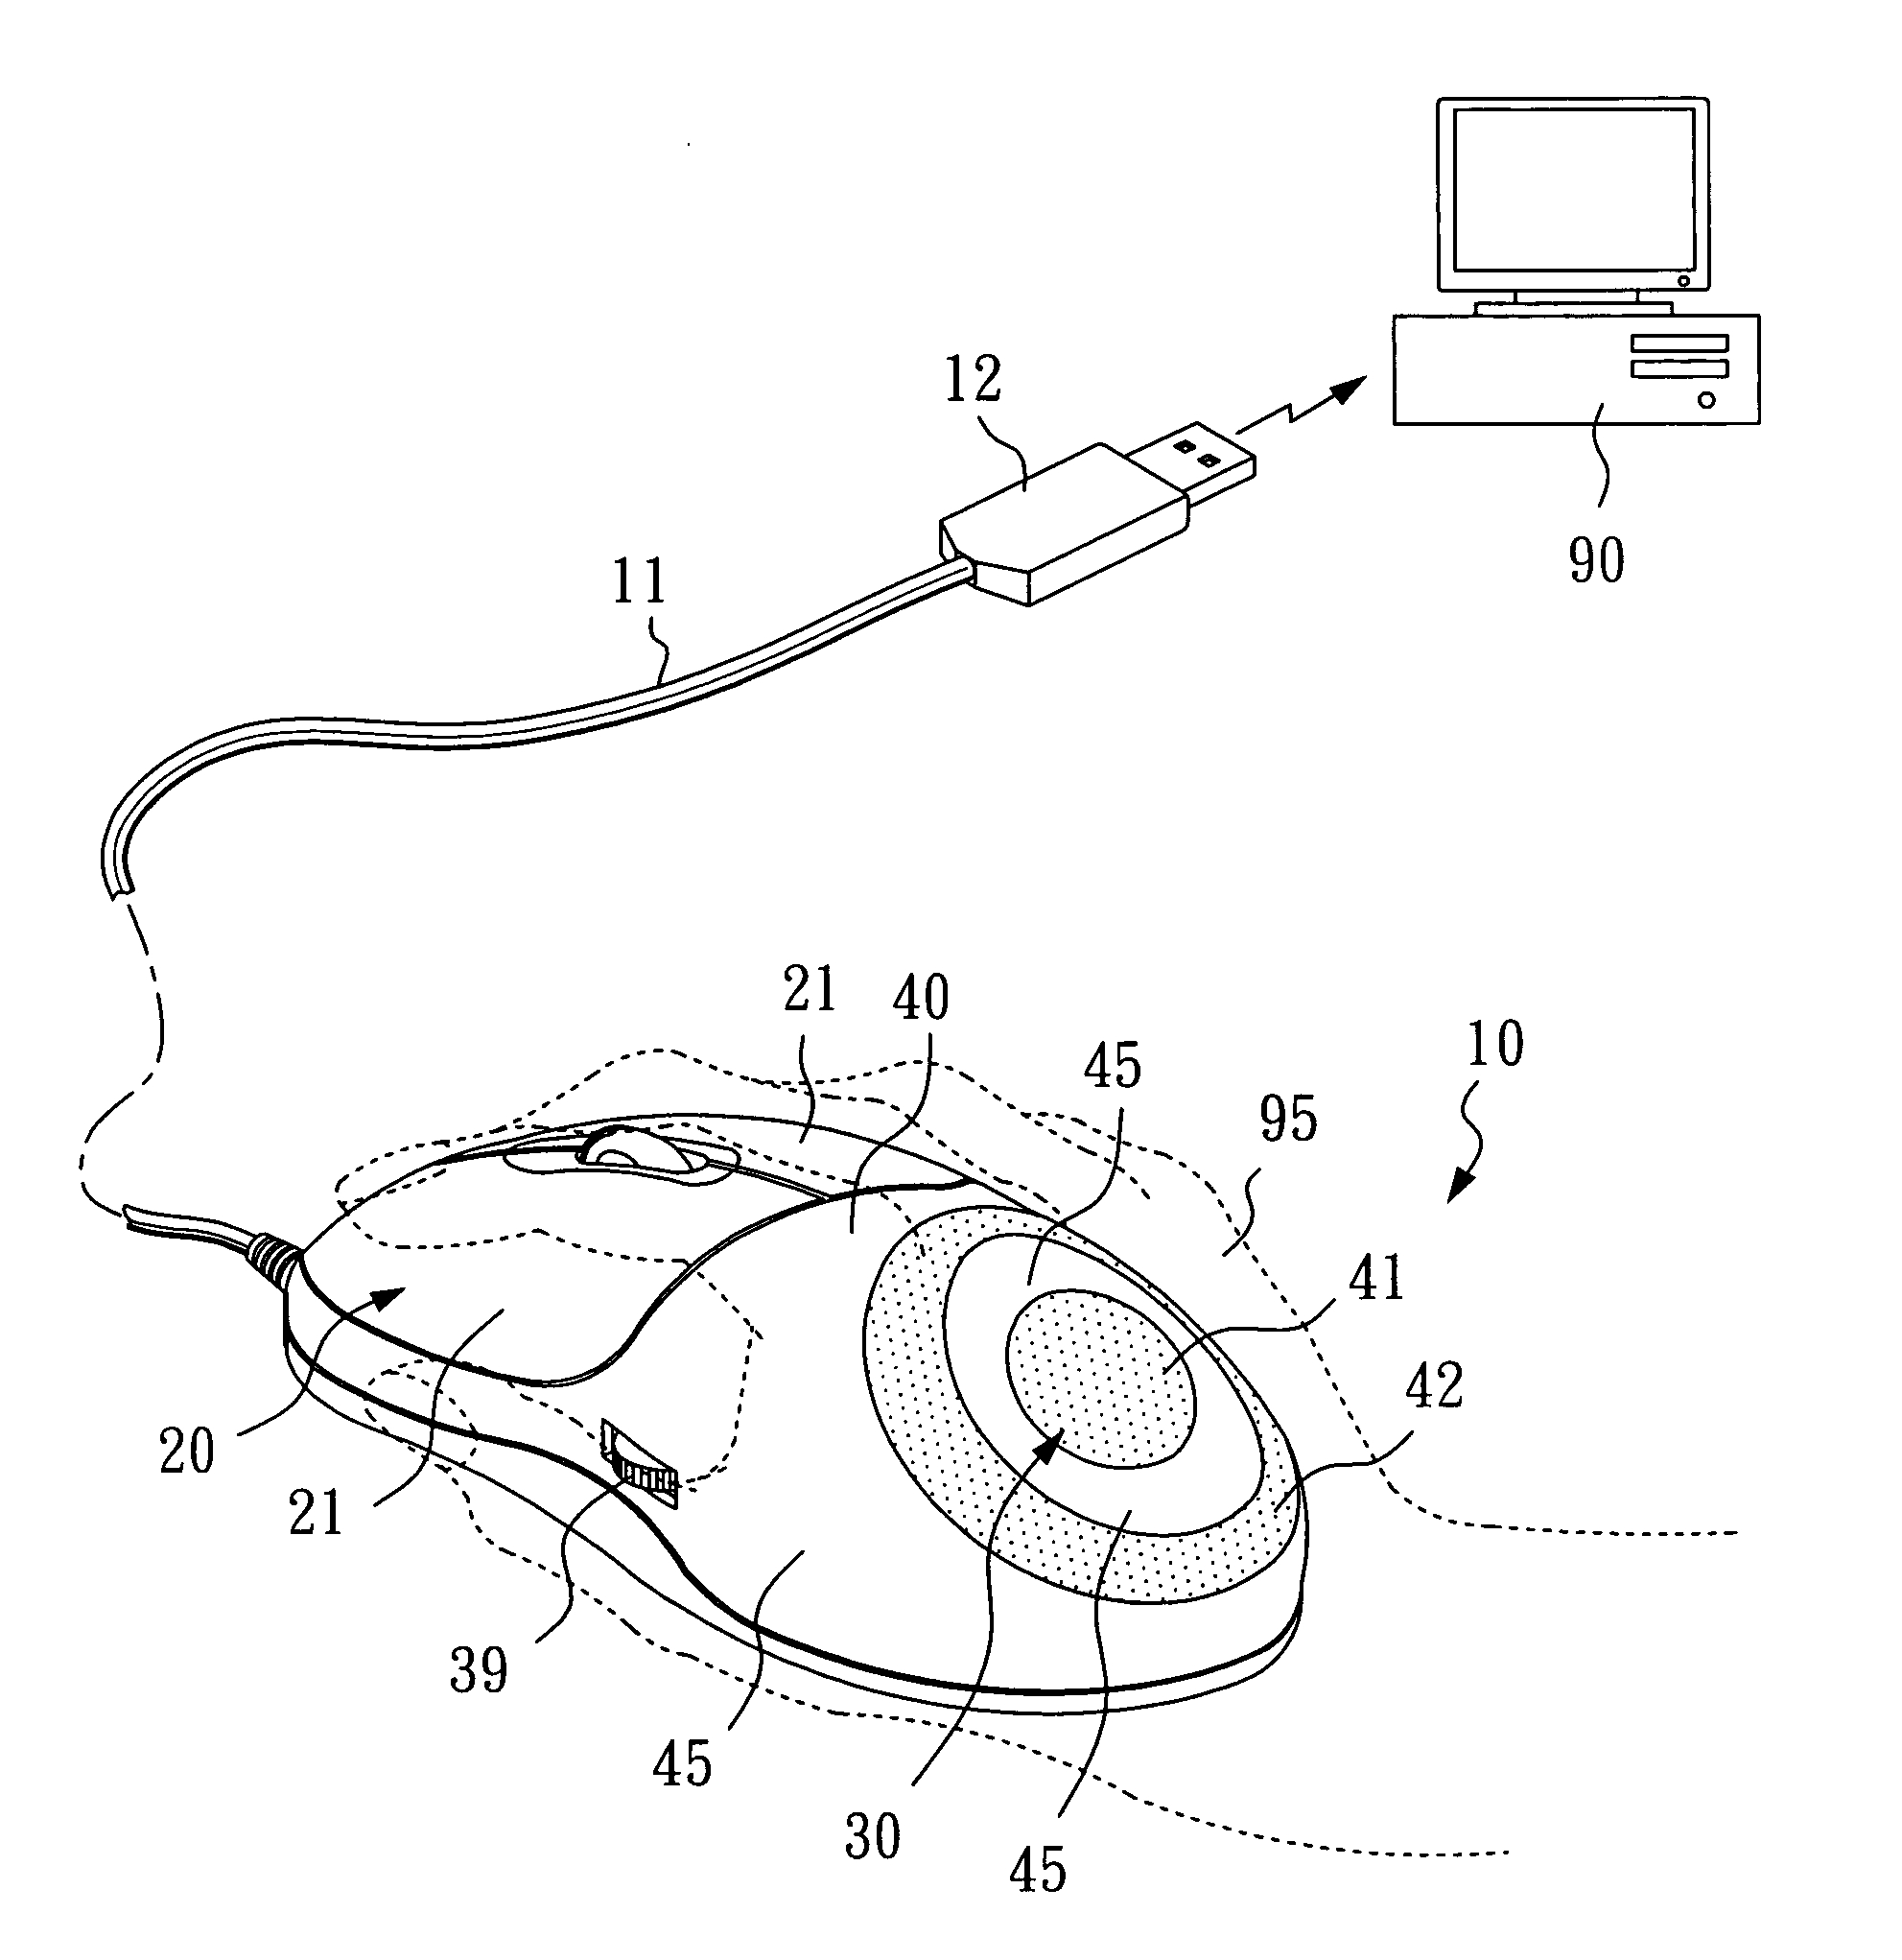 Computer mouse with transcutaneous electro nerve stimulation capabilities